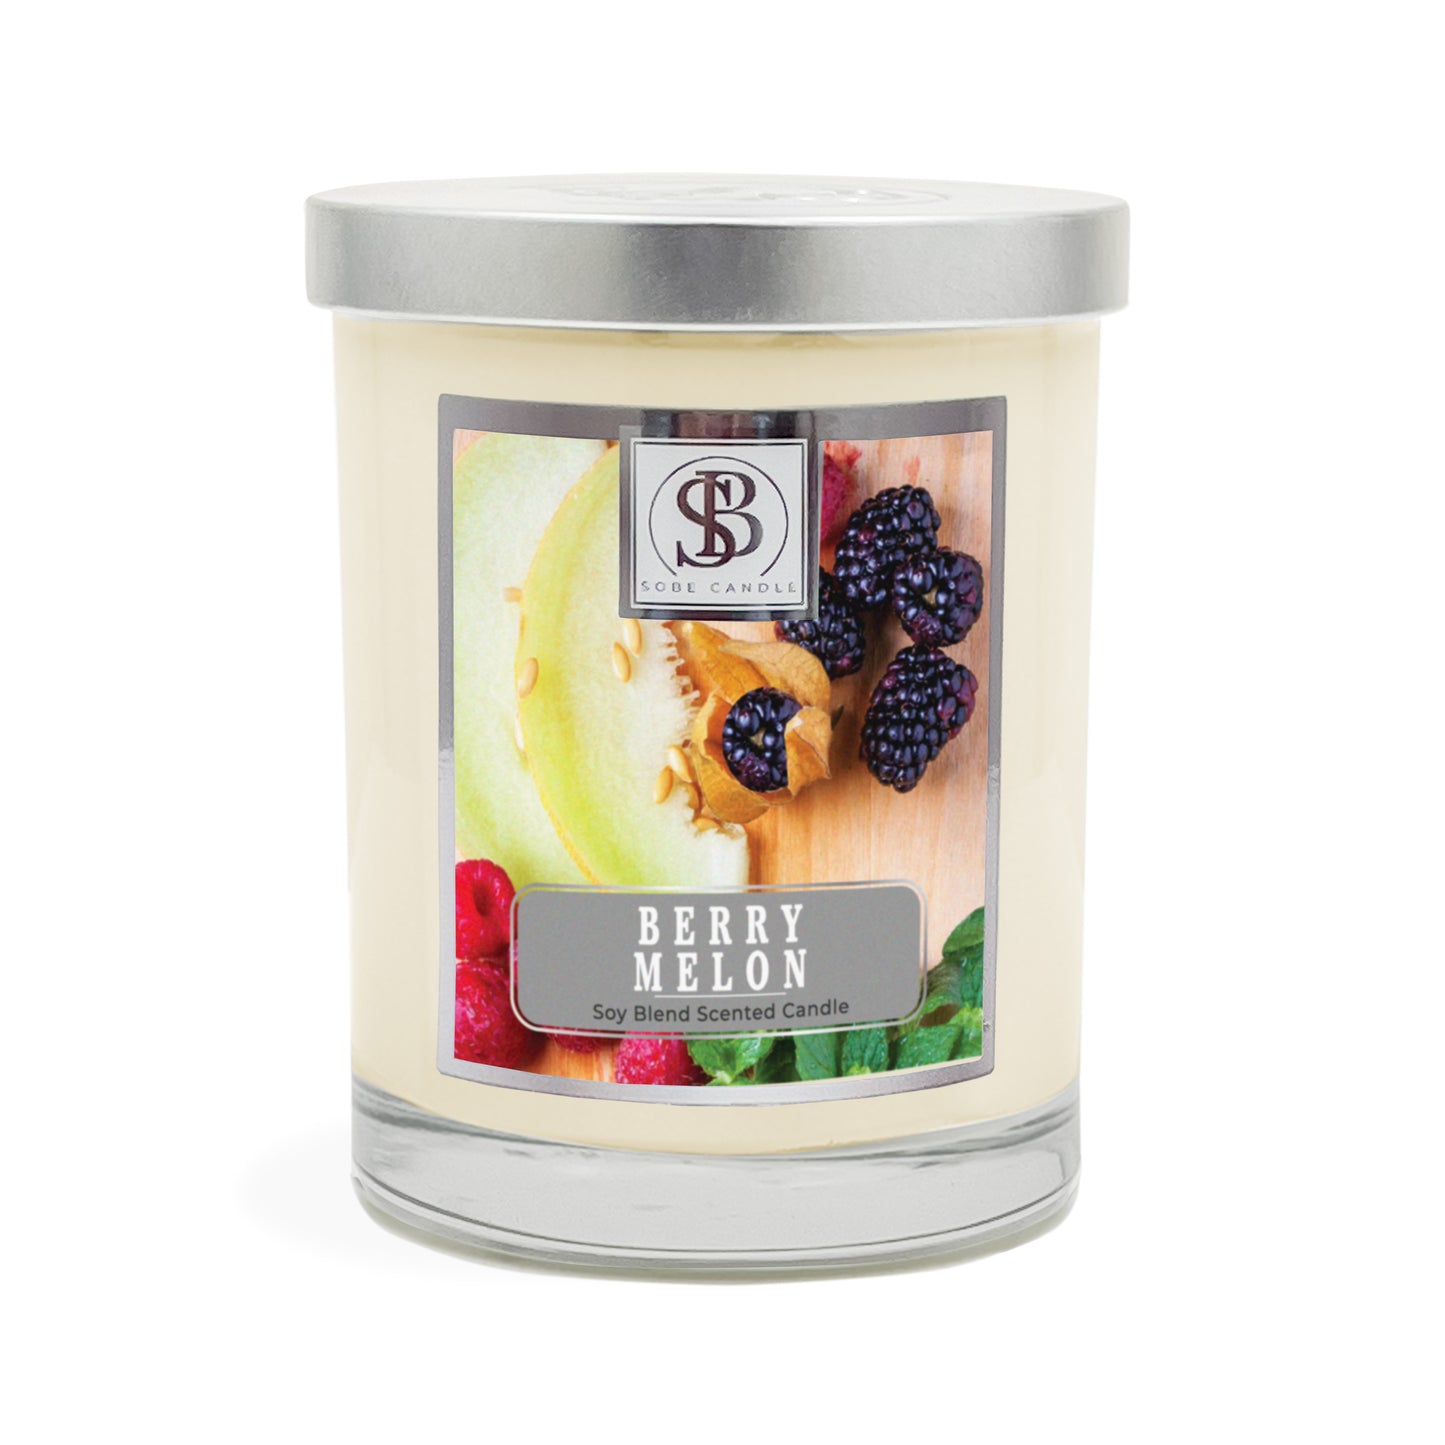 BERRY MELON | Soy Scented Candle 11 oz